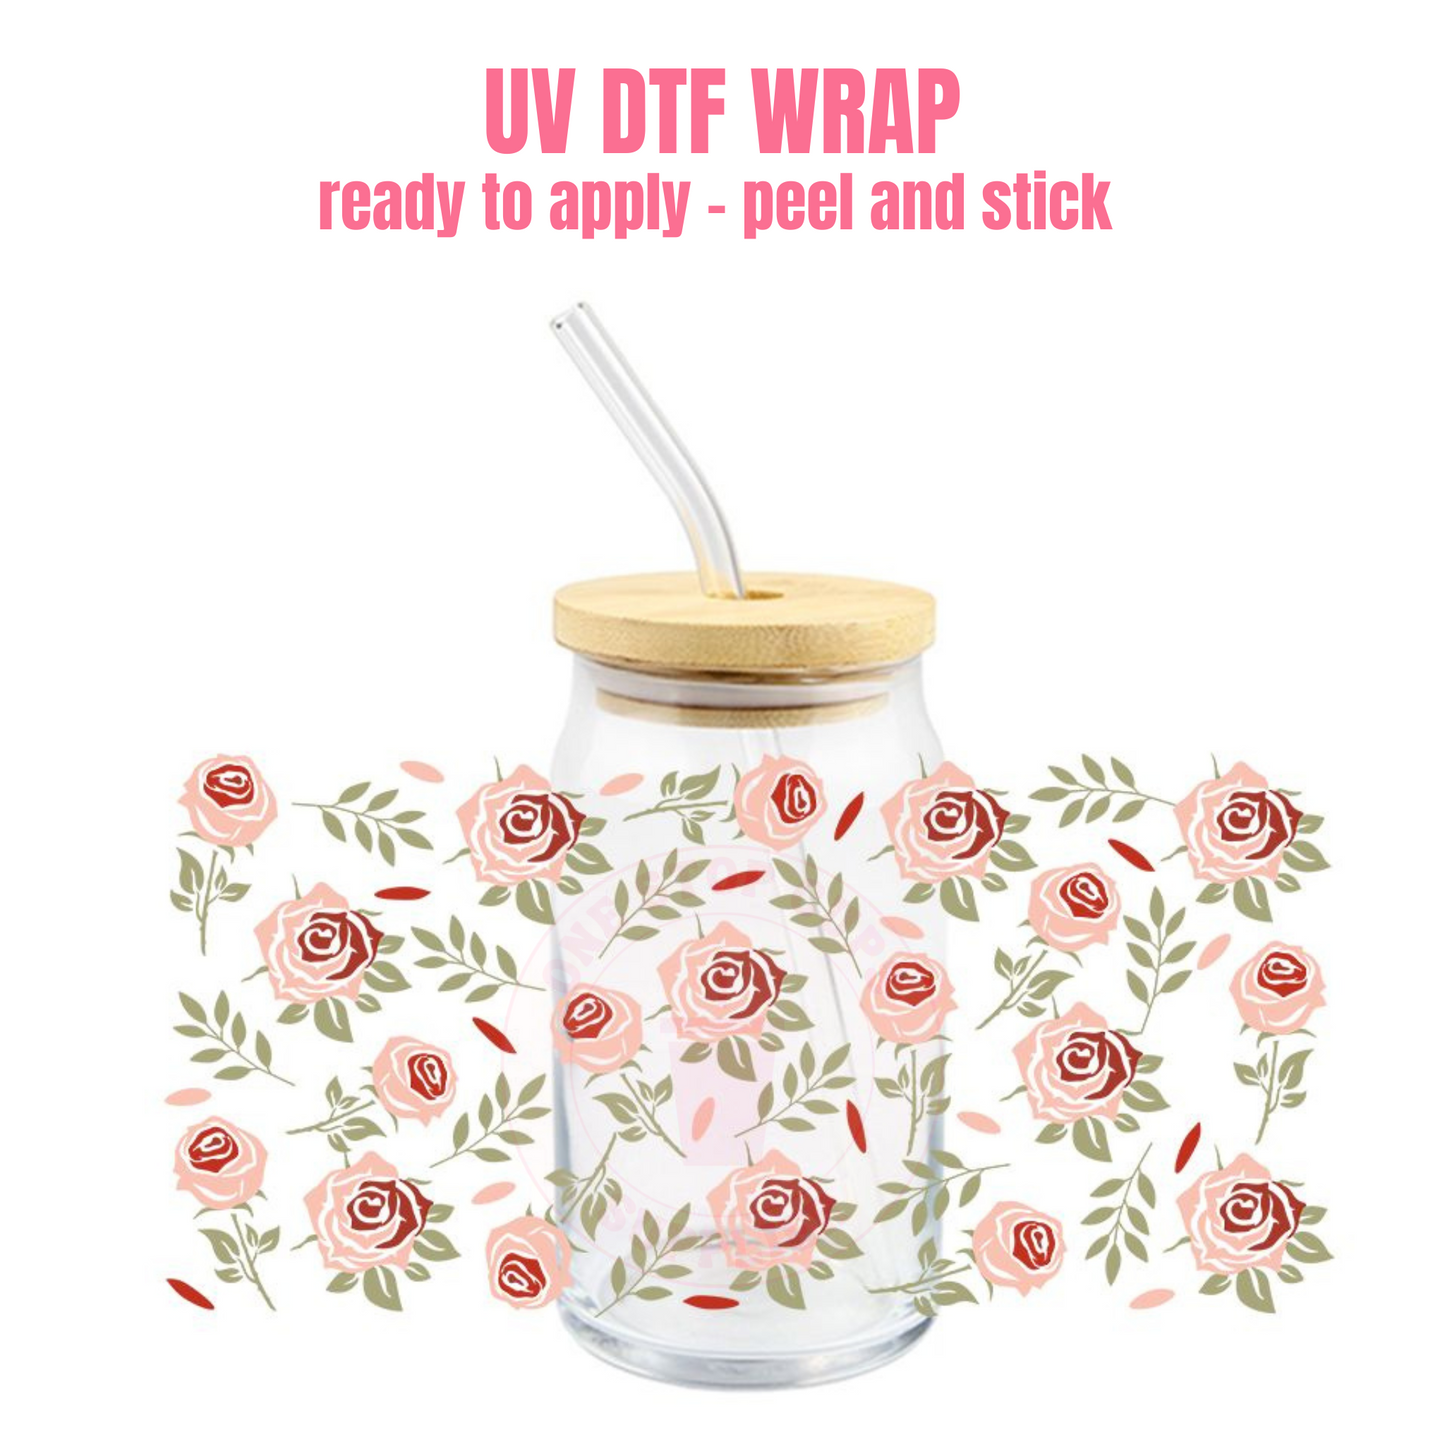 UV DTF CUP WRAP Roses P47